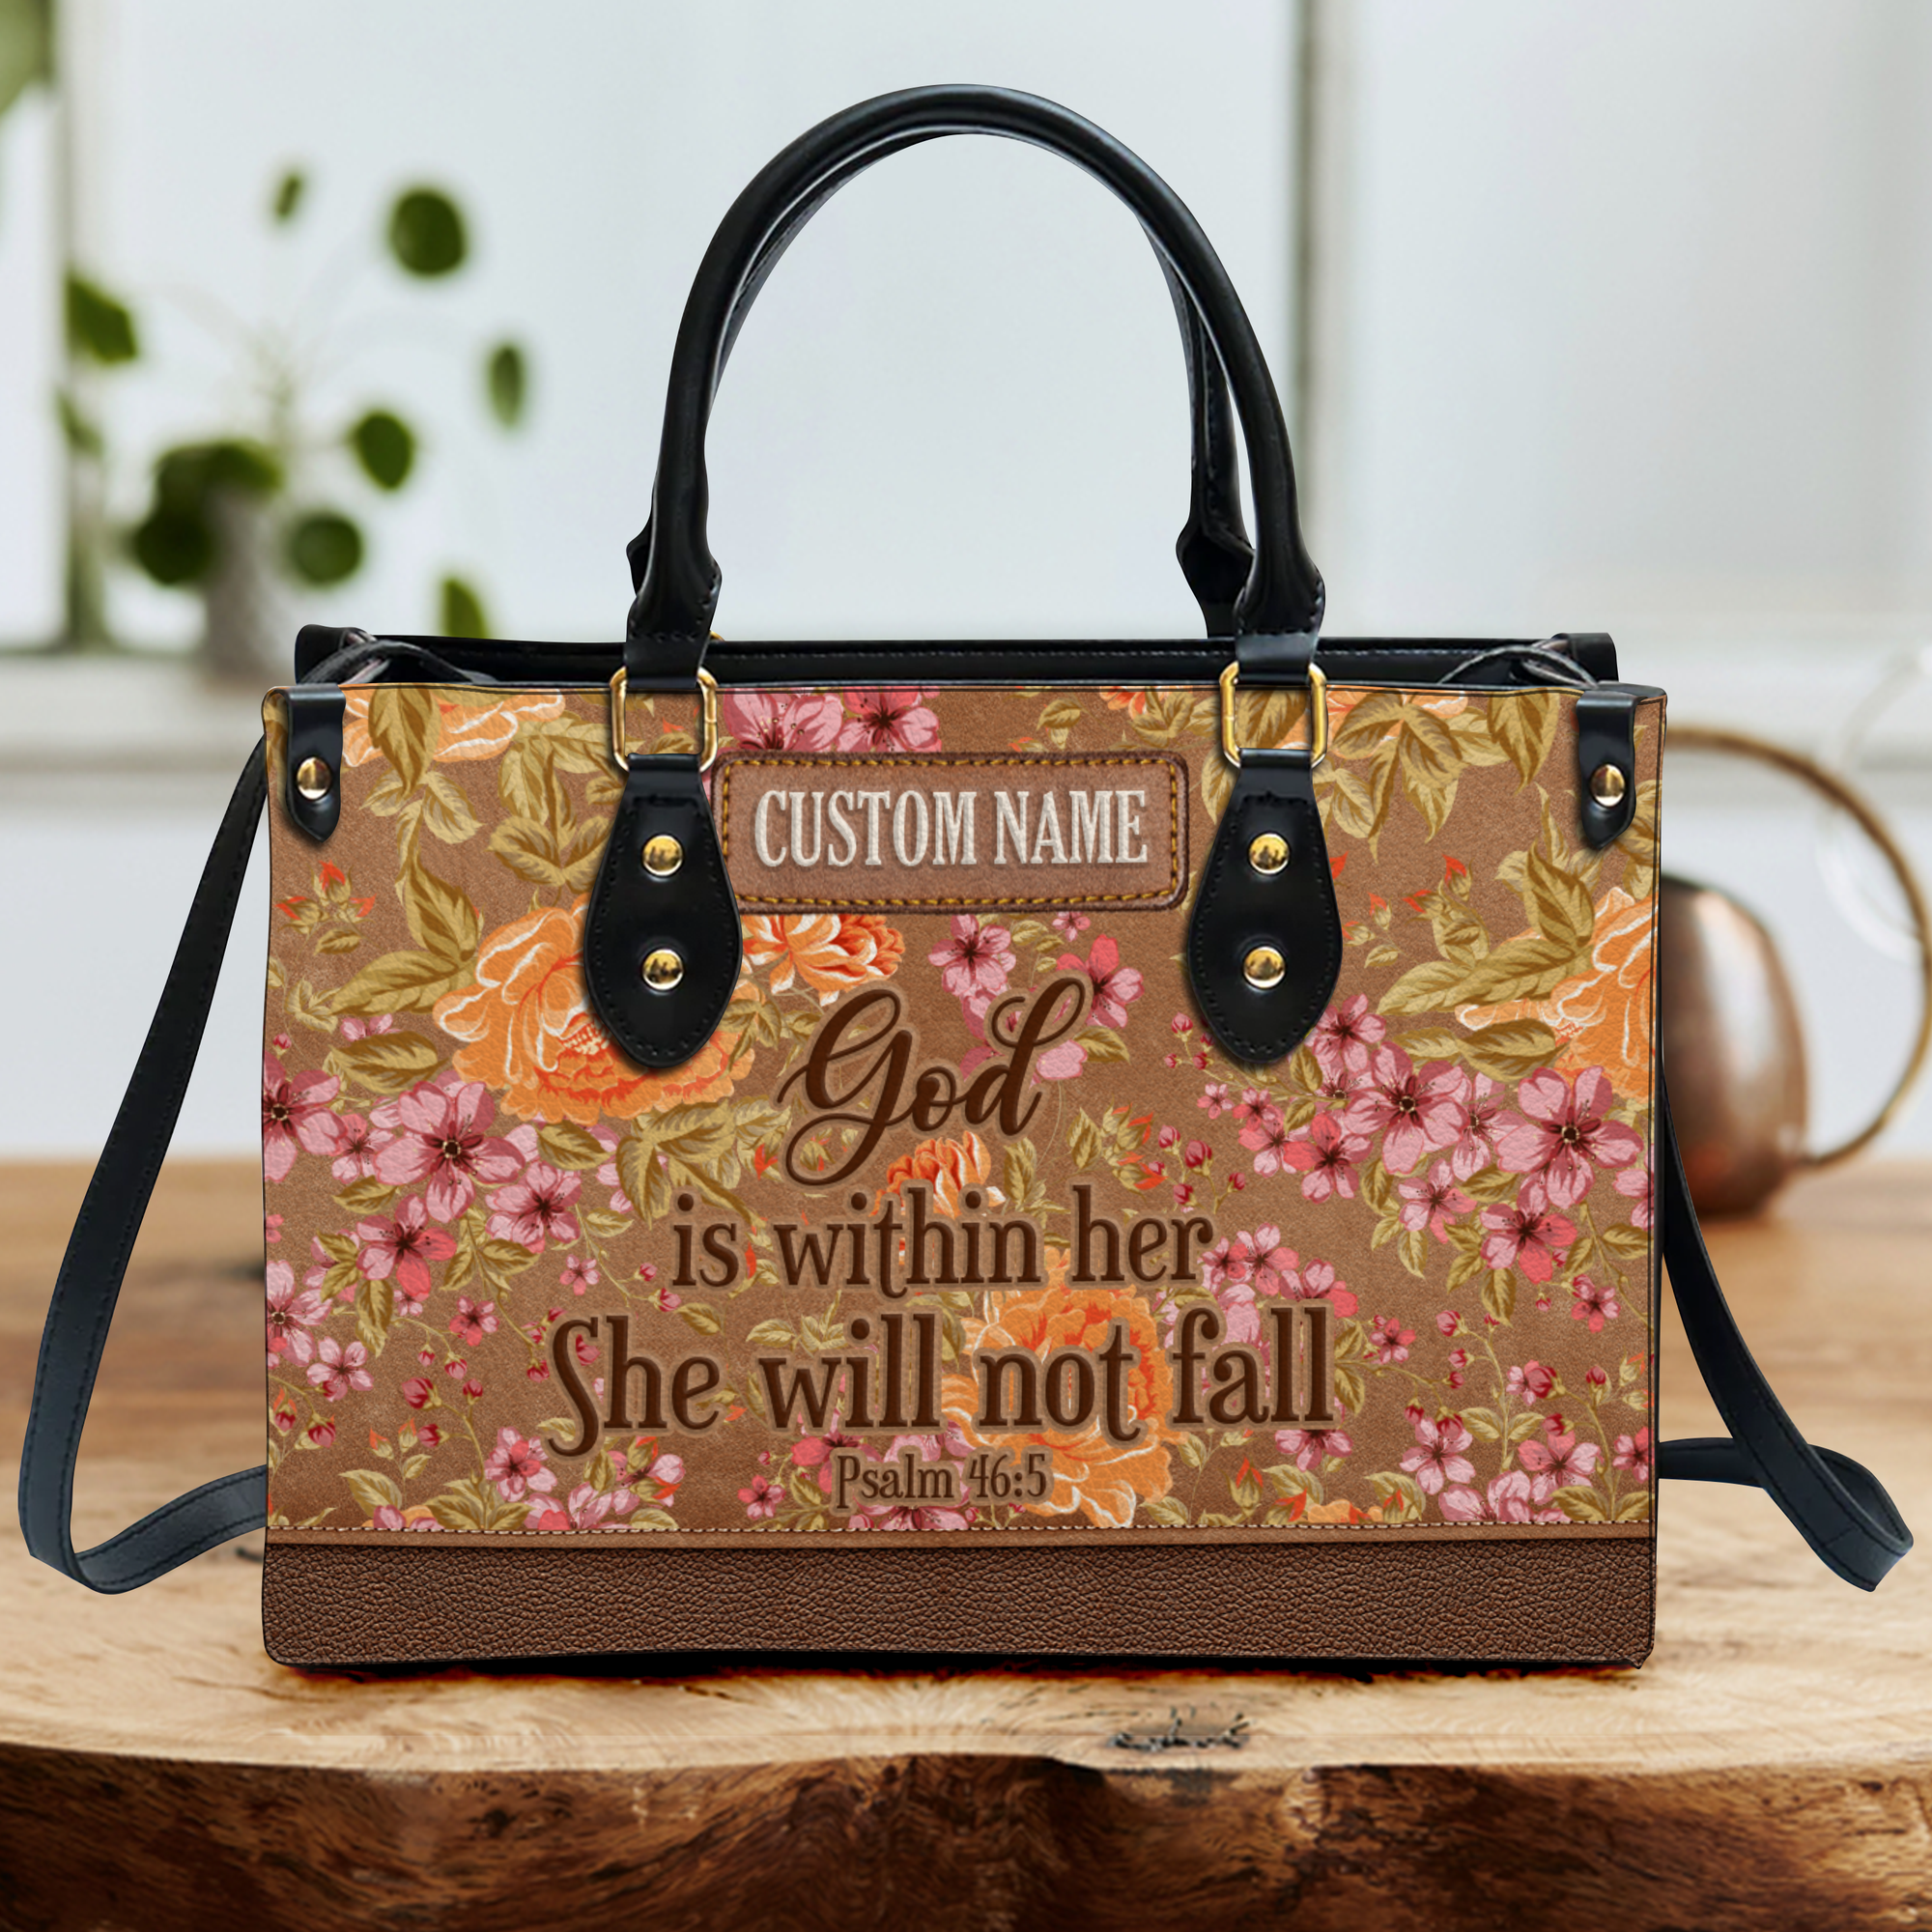 Vintage Roses Flower Leather Inspirational She Will Not Fall Custom Leather Handbag - Personalized Custom Leather Bag